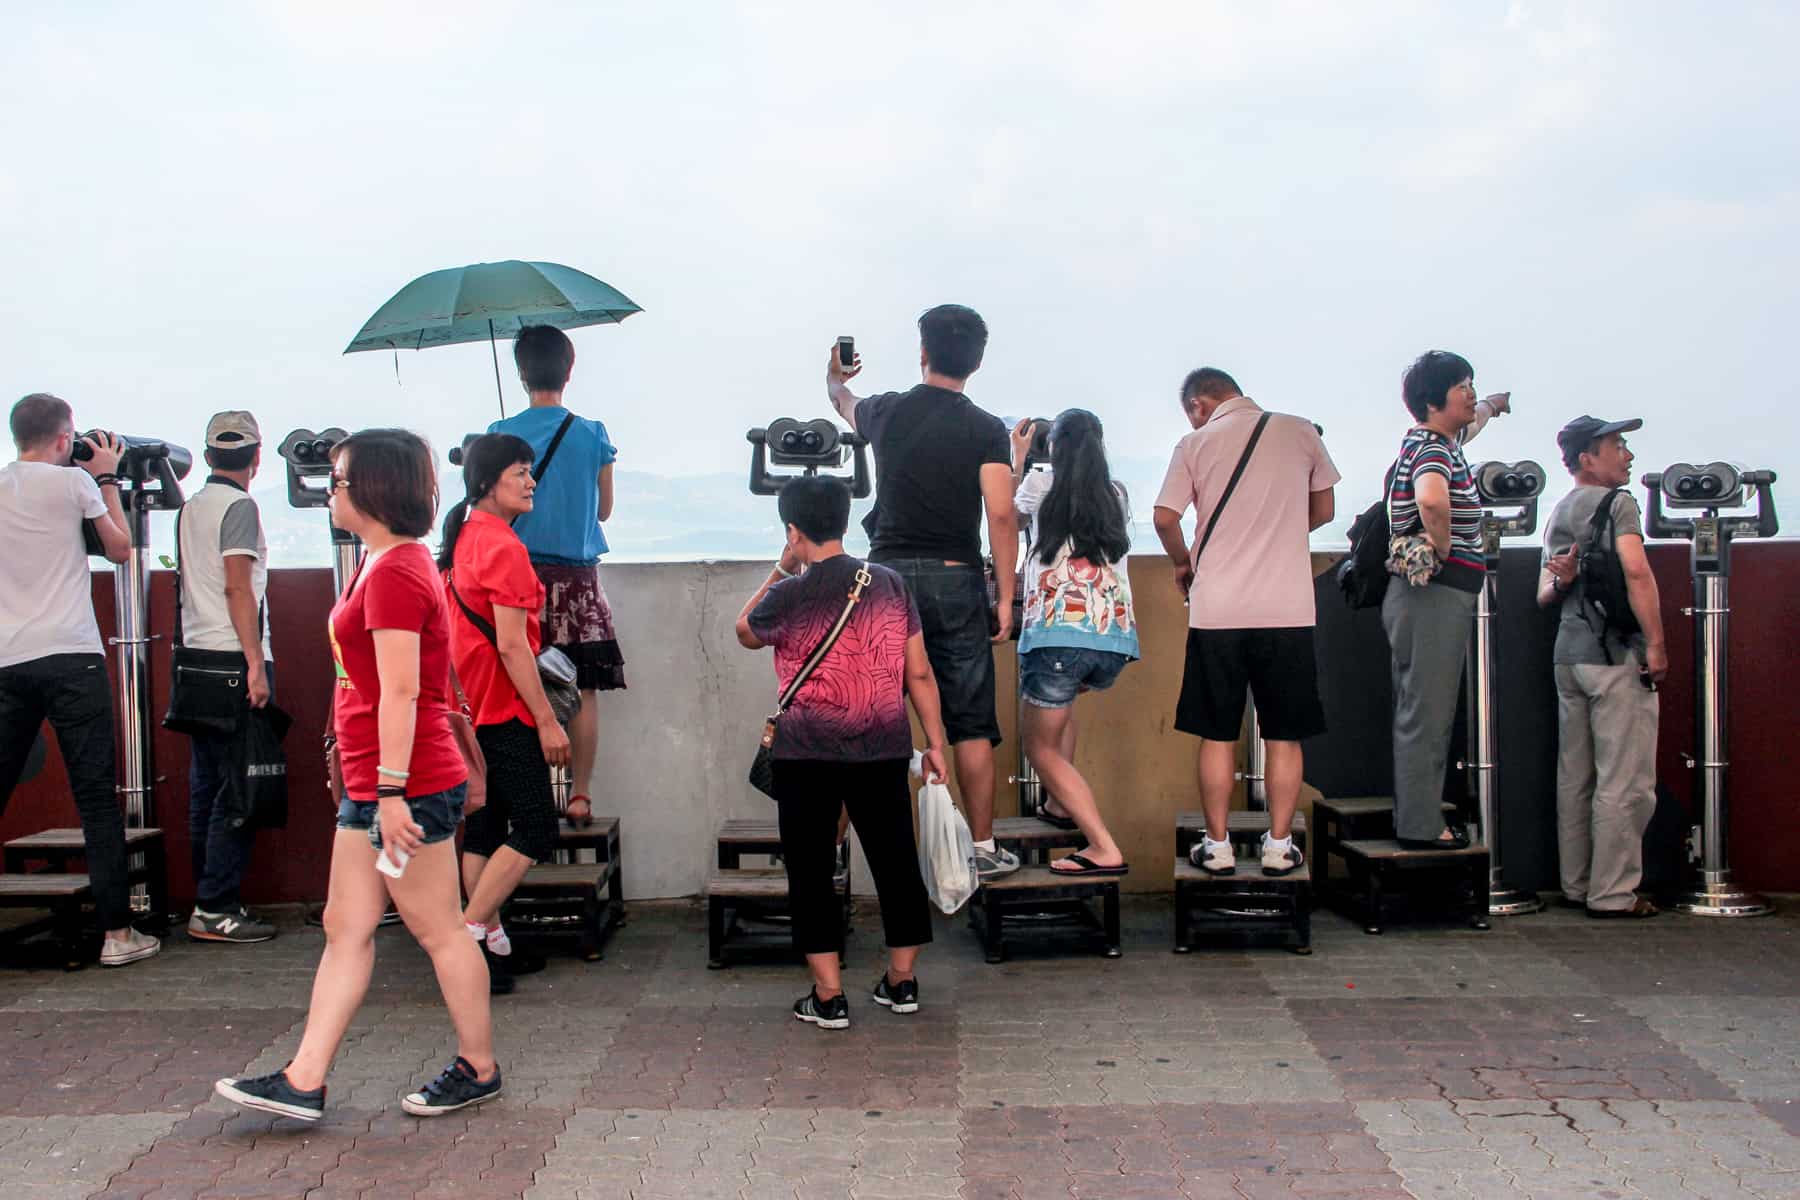 Visitors on a DMZ tour in South Korea at an observatory with rows of binoculars looking out to North Korea.